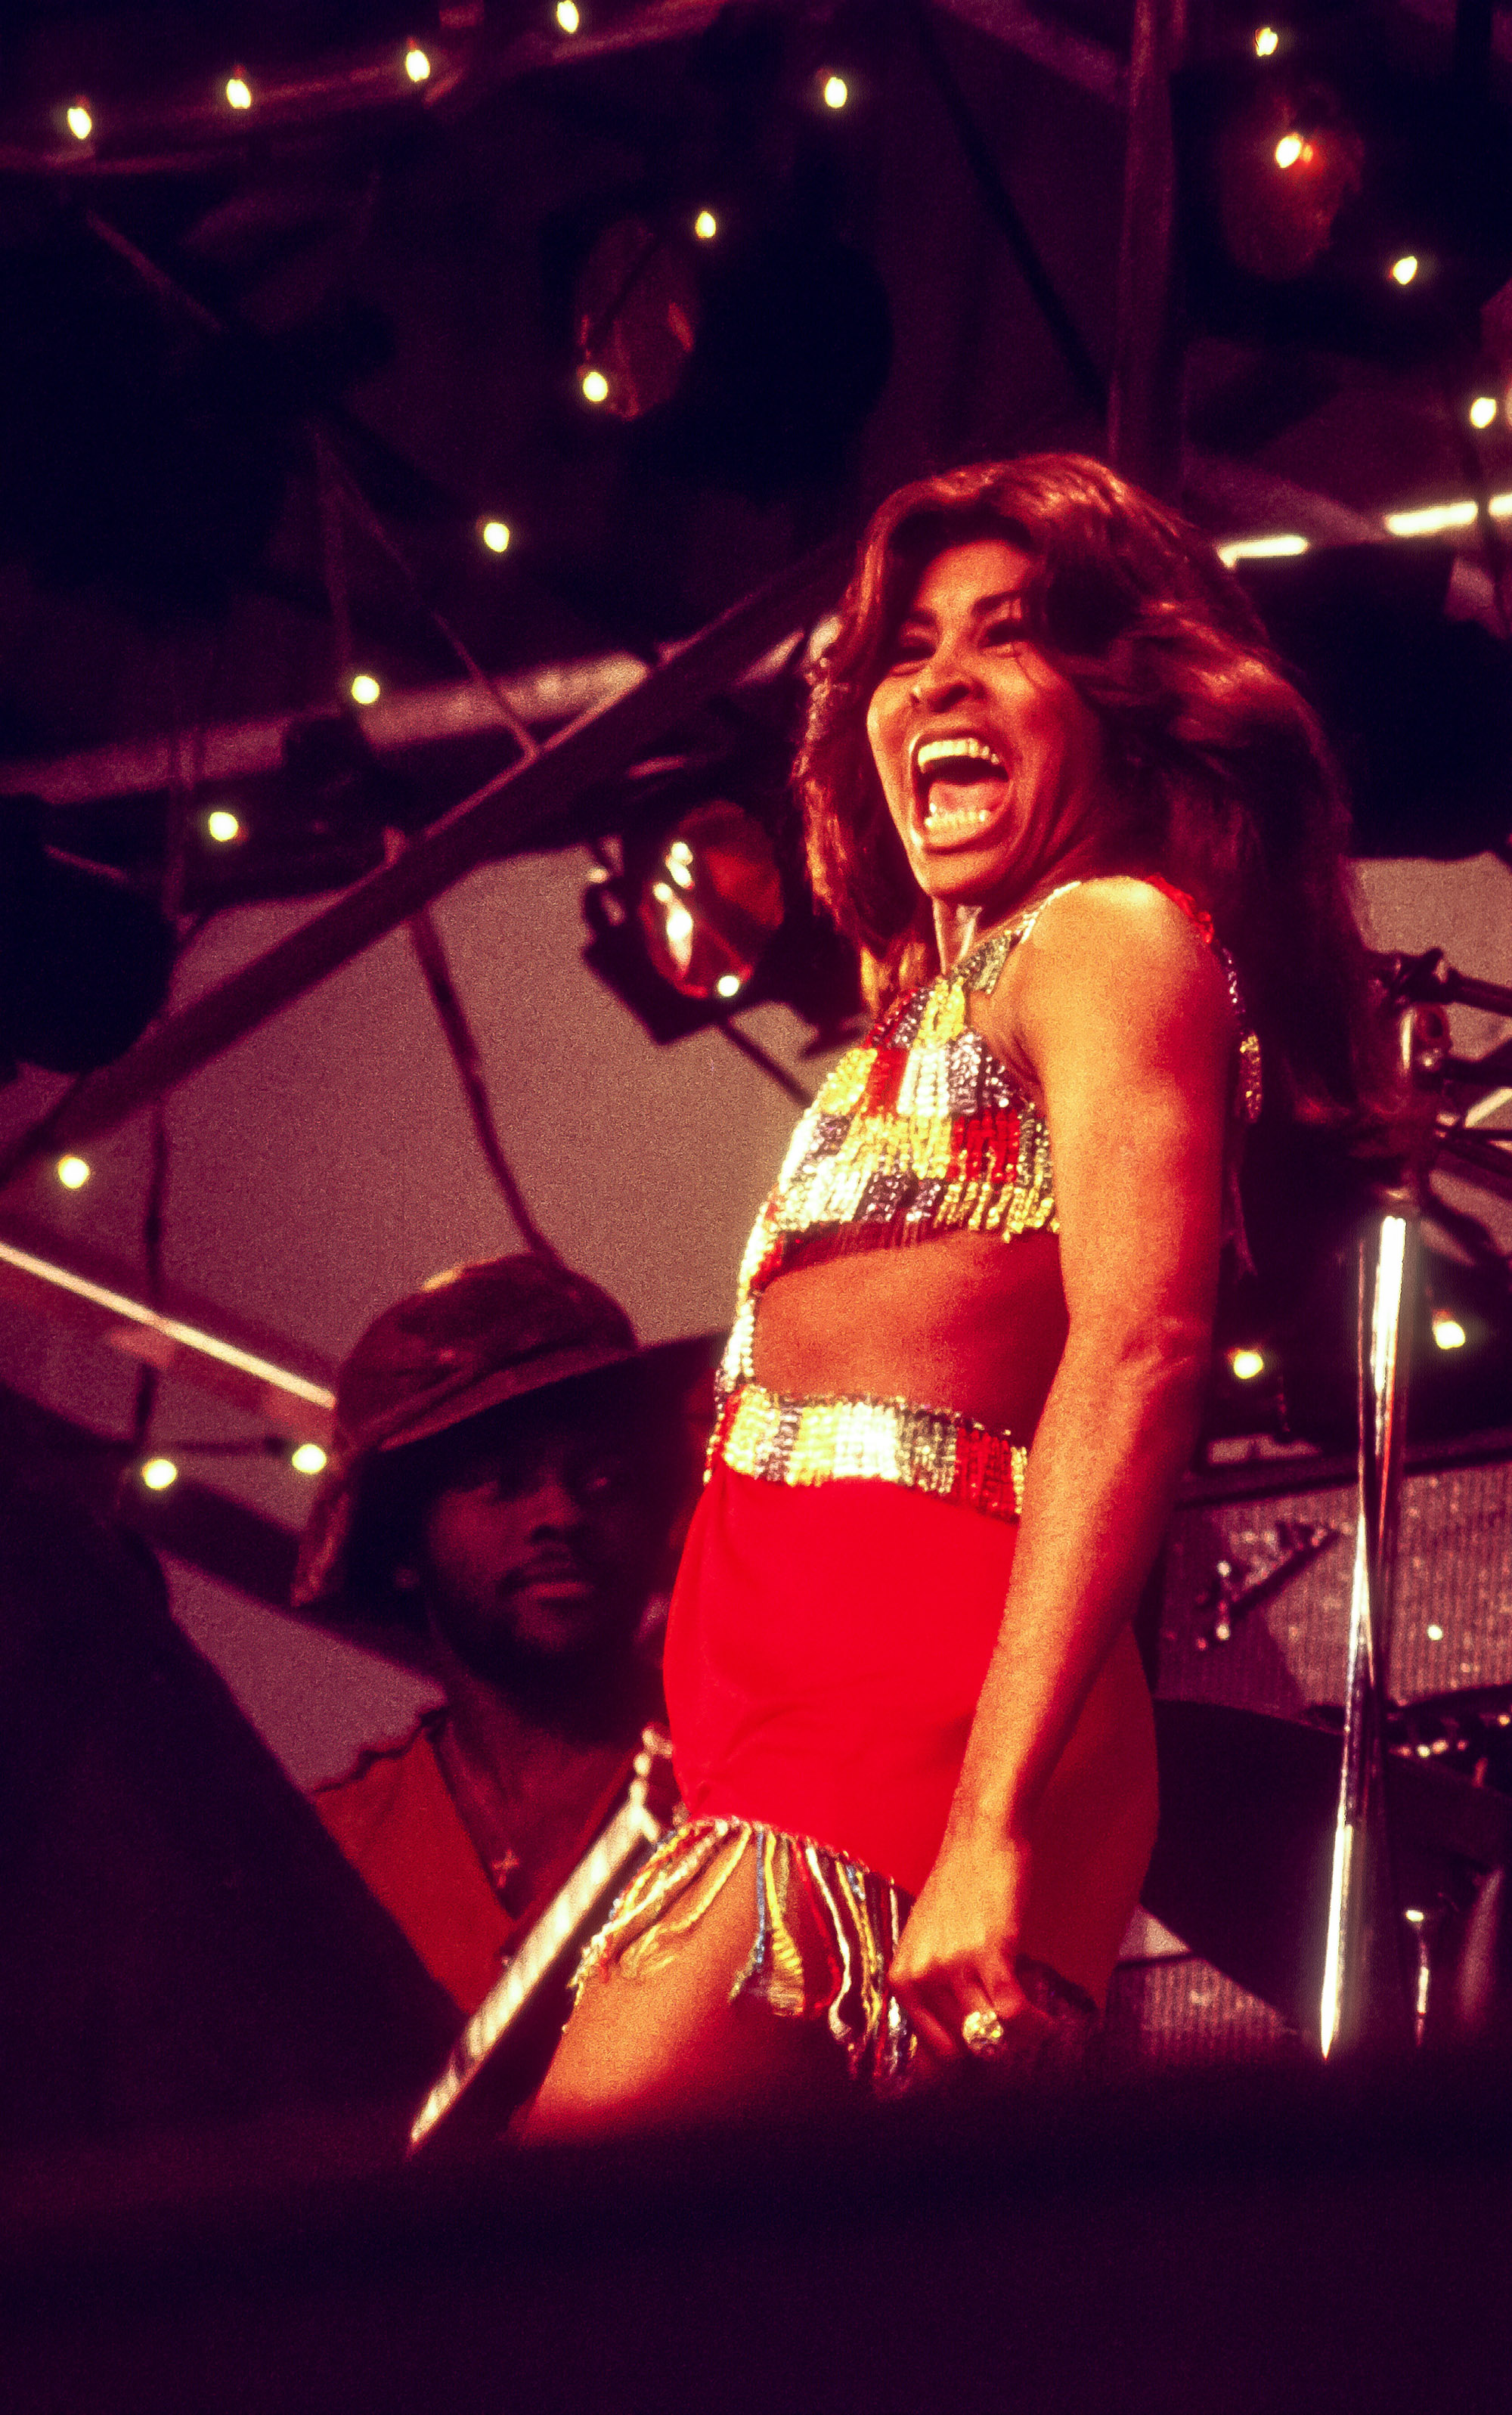 American R&B, Soul, and Pop singer Tina Turner performs during the Schaefer Music Festival at Wollman Rink in Central Park, New York, New York, 2 July 1971. (Photo: Jack Vartoogian / Getty Images)